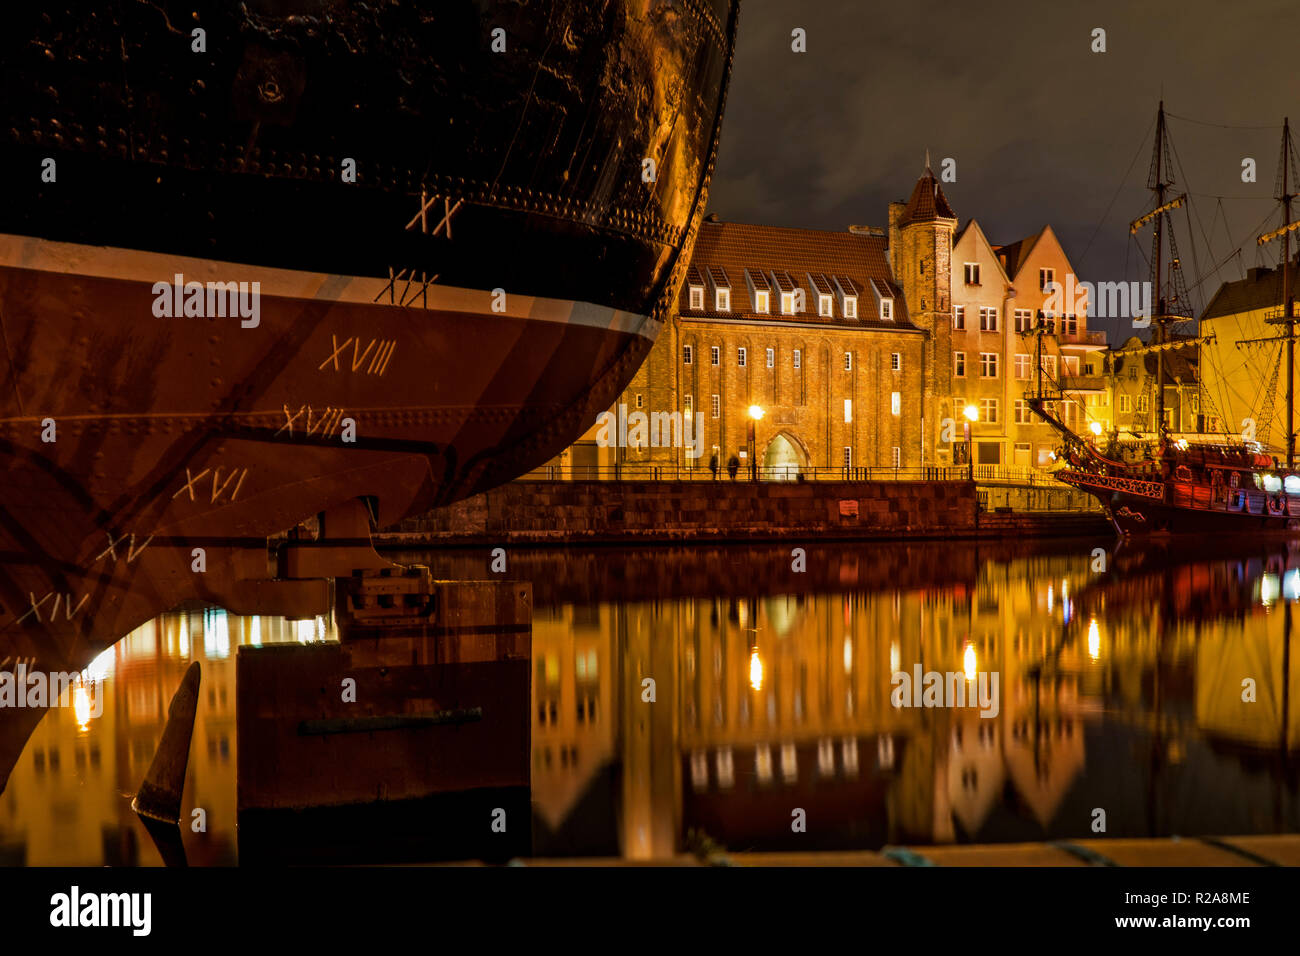 Photo in the city of Gdansk, Poland with the old merchant ship 'Soldek'. Stock Photo